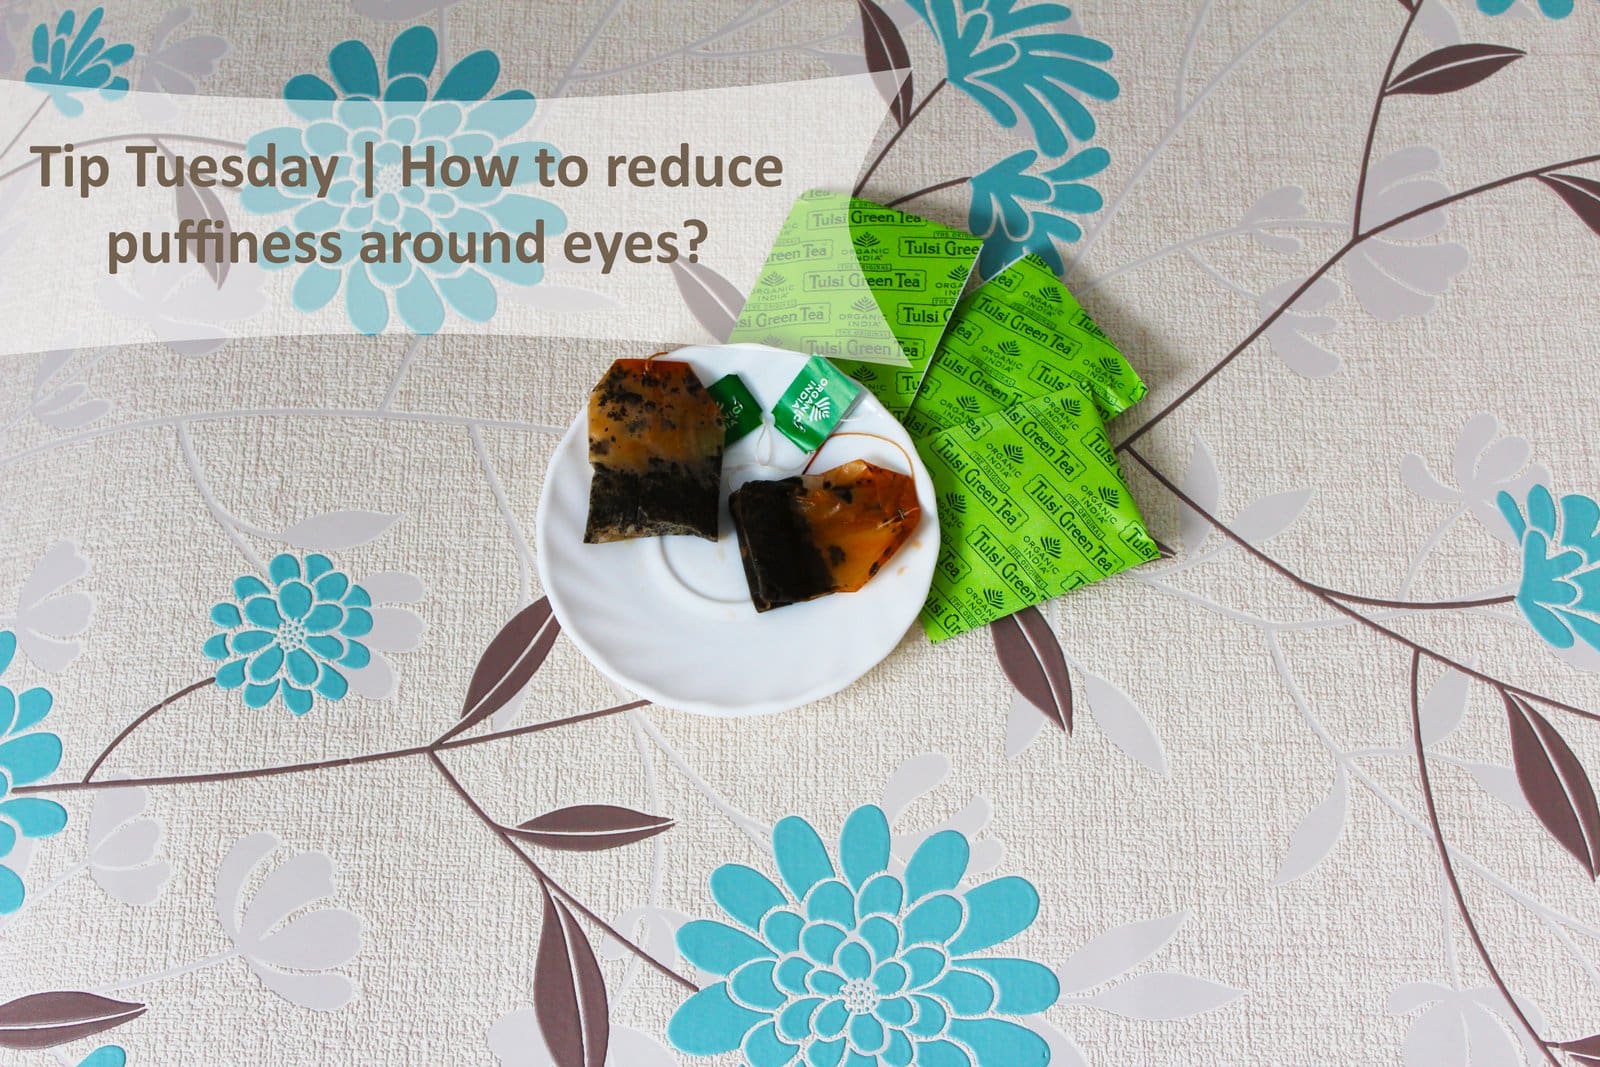 Tip Tuesday | How to reduce puffiness around eyes?